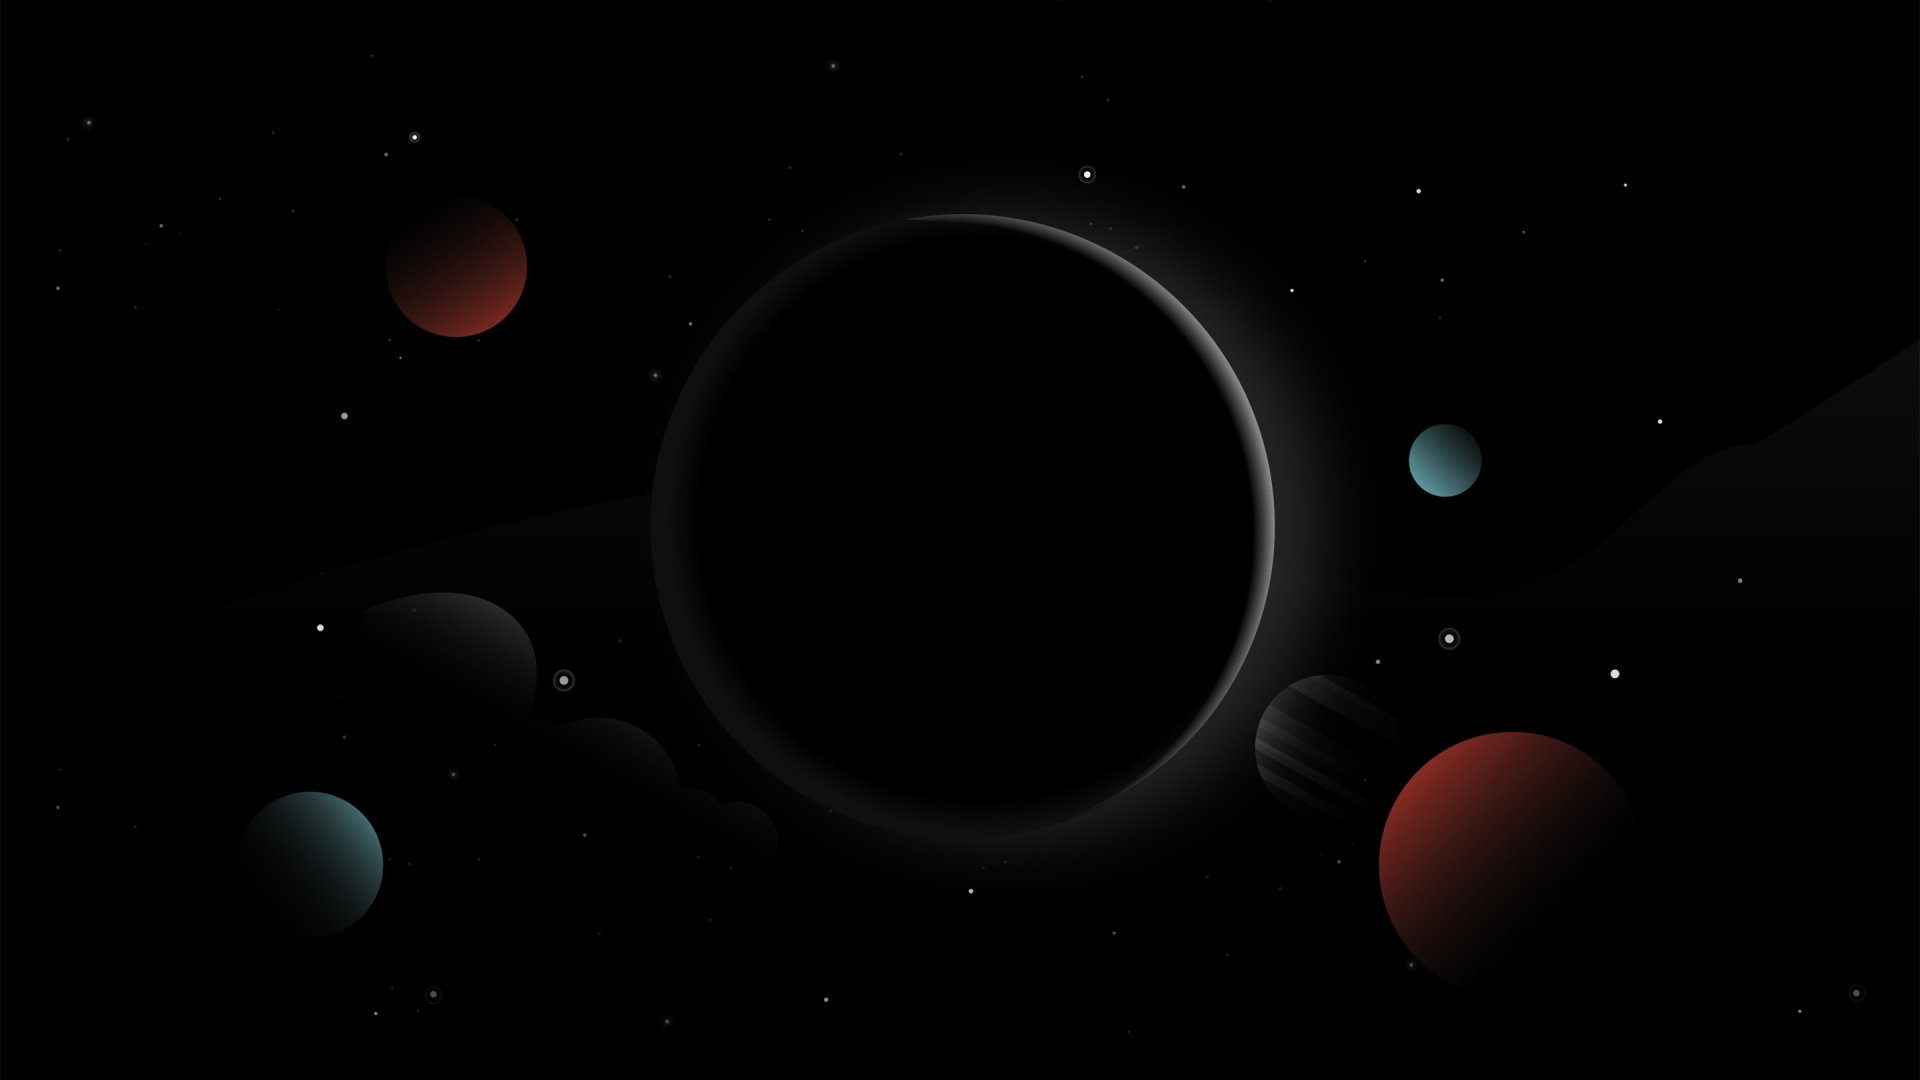 Solar System Planets Wallpaper Hd | Best HQ Wallpapers